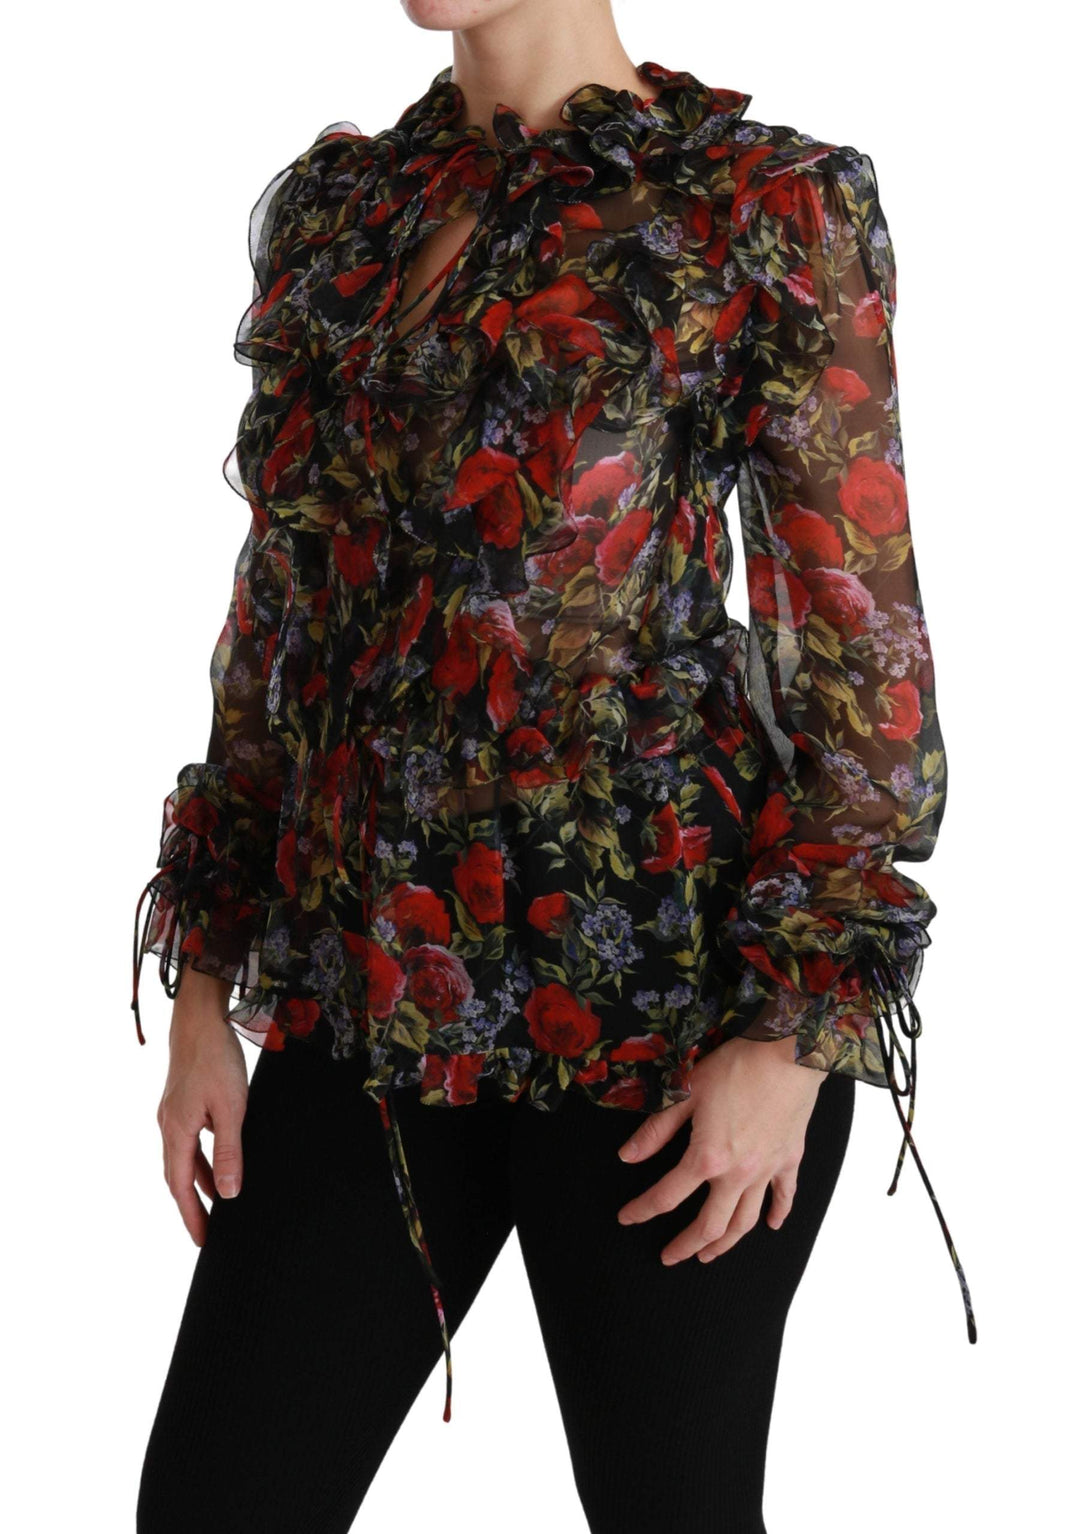 Dolce & Gabbana Black Floral Roses Blouse Silk Top #women, Black, Dolce & Gabbana, feed-agegroup-adult, feed-color-Black, feed-gender-female, IT36 | XS, Tops & T-Shirts - Women - Clothing, Women - New Arrivals at SEYMAYKA